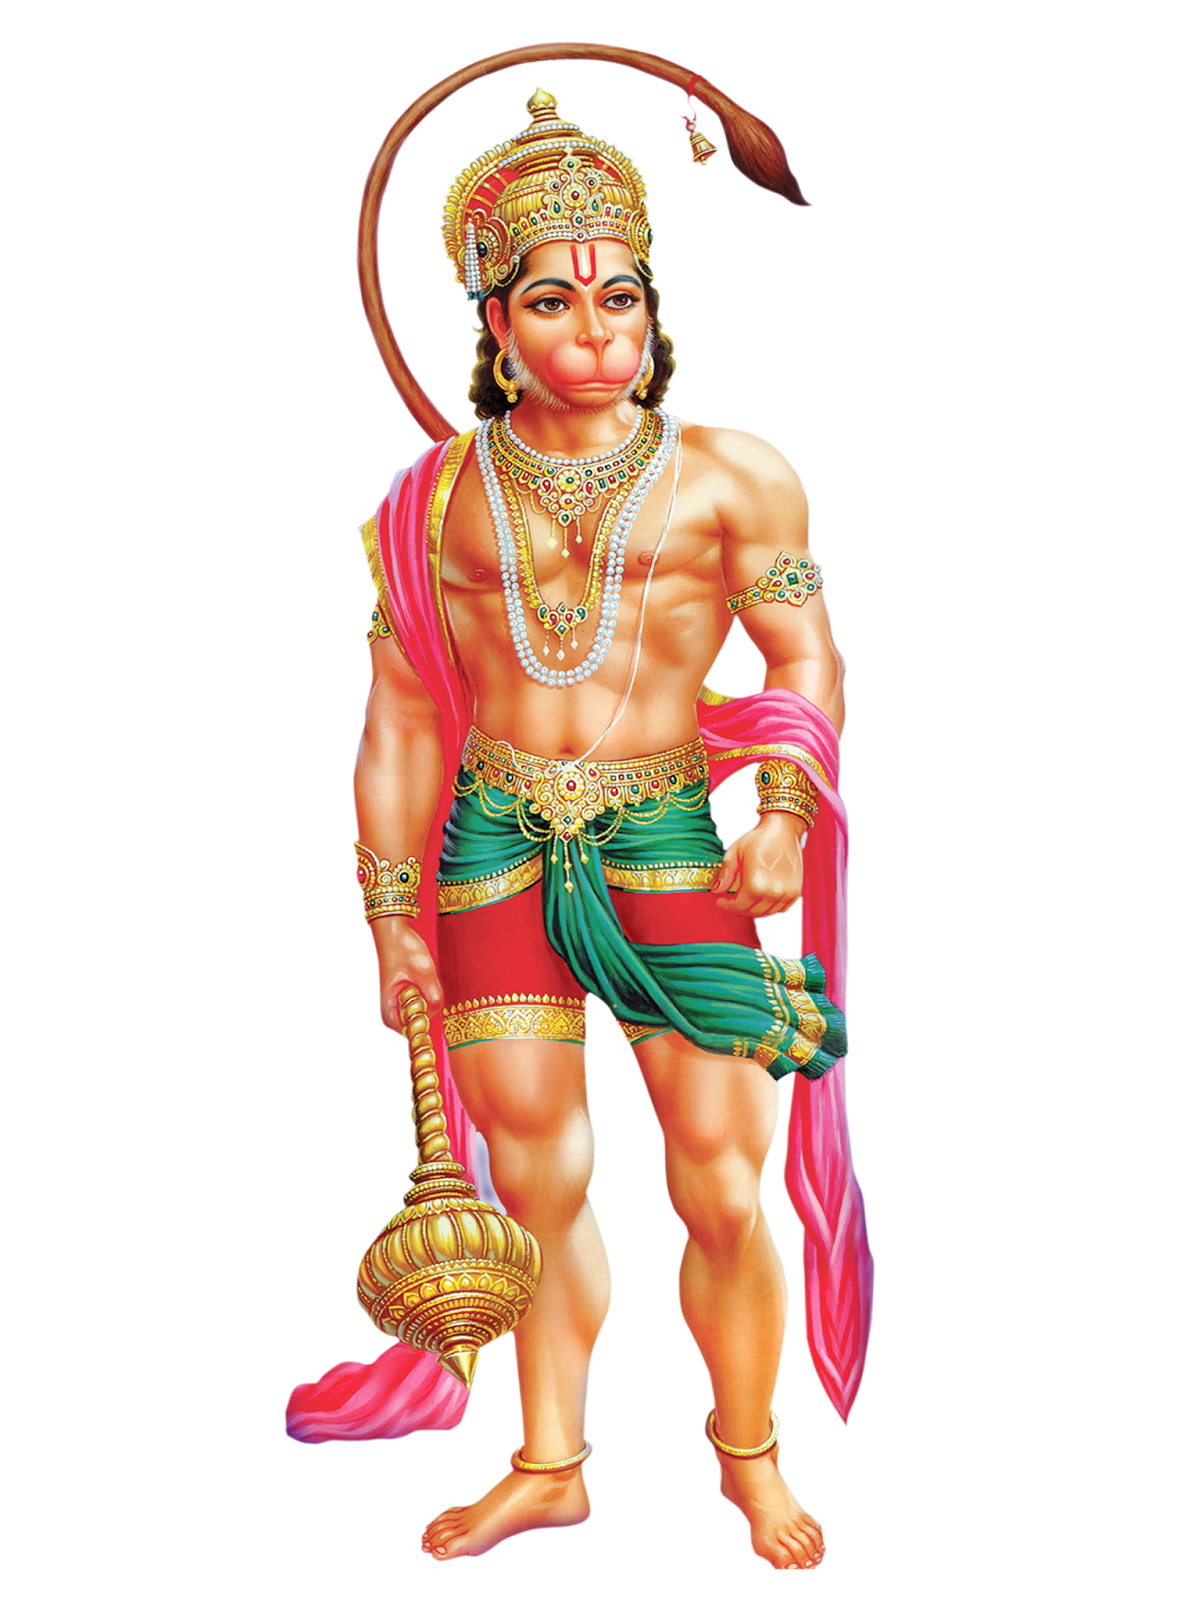 famous lord anjaneya hd photos in png format | bakthi.co.in ...